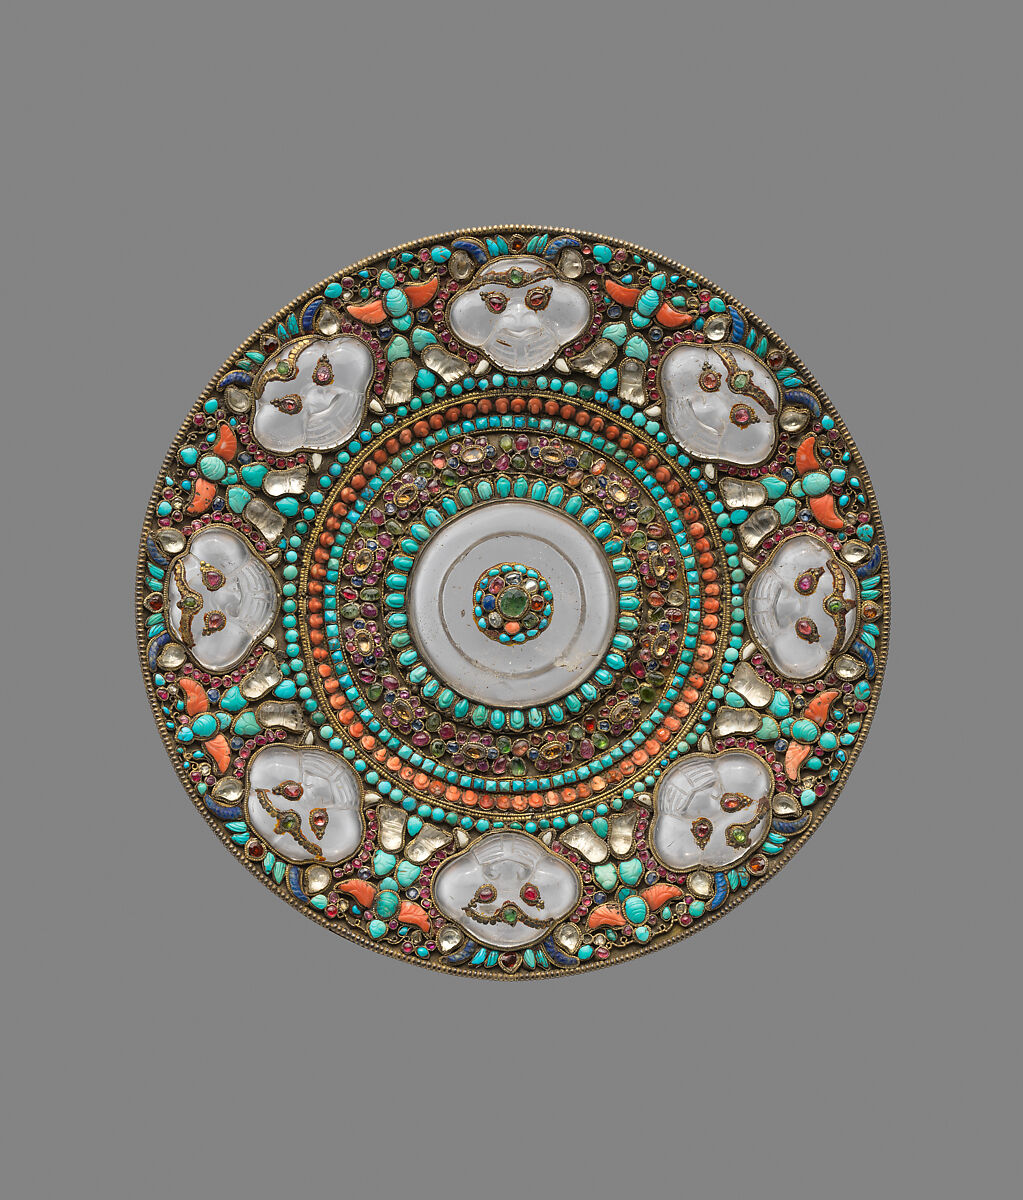 Dish for ritual offerings, Gilt silver, rock crystal, emeralds, rubies, sapphires, yellow quartz, garnets, spinel’s, coral, shell, lapis lazuli, and semi-precious stones, Nepal 